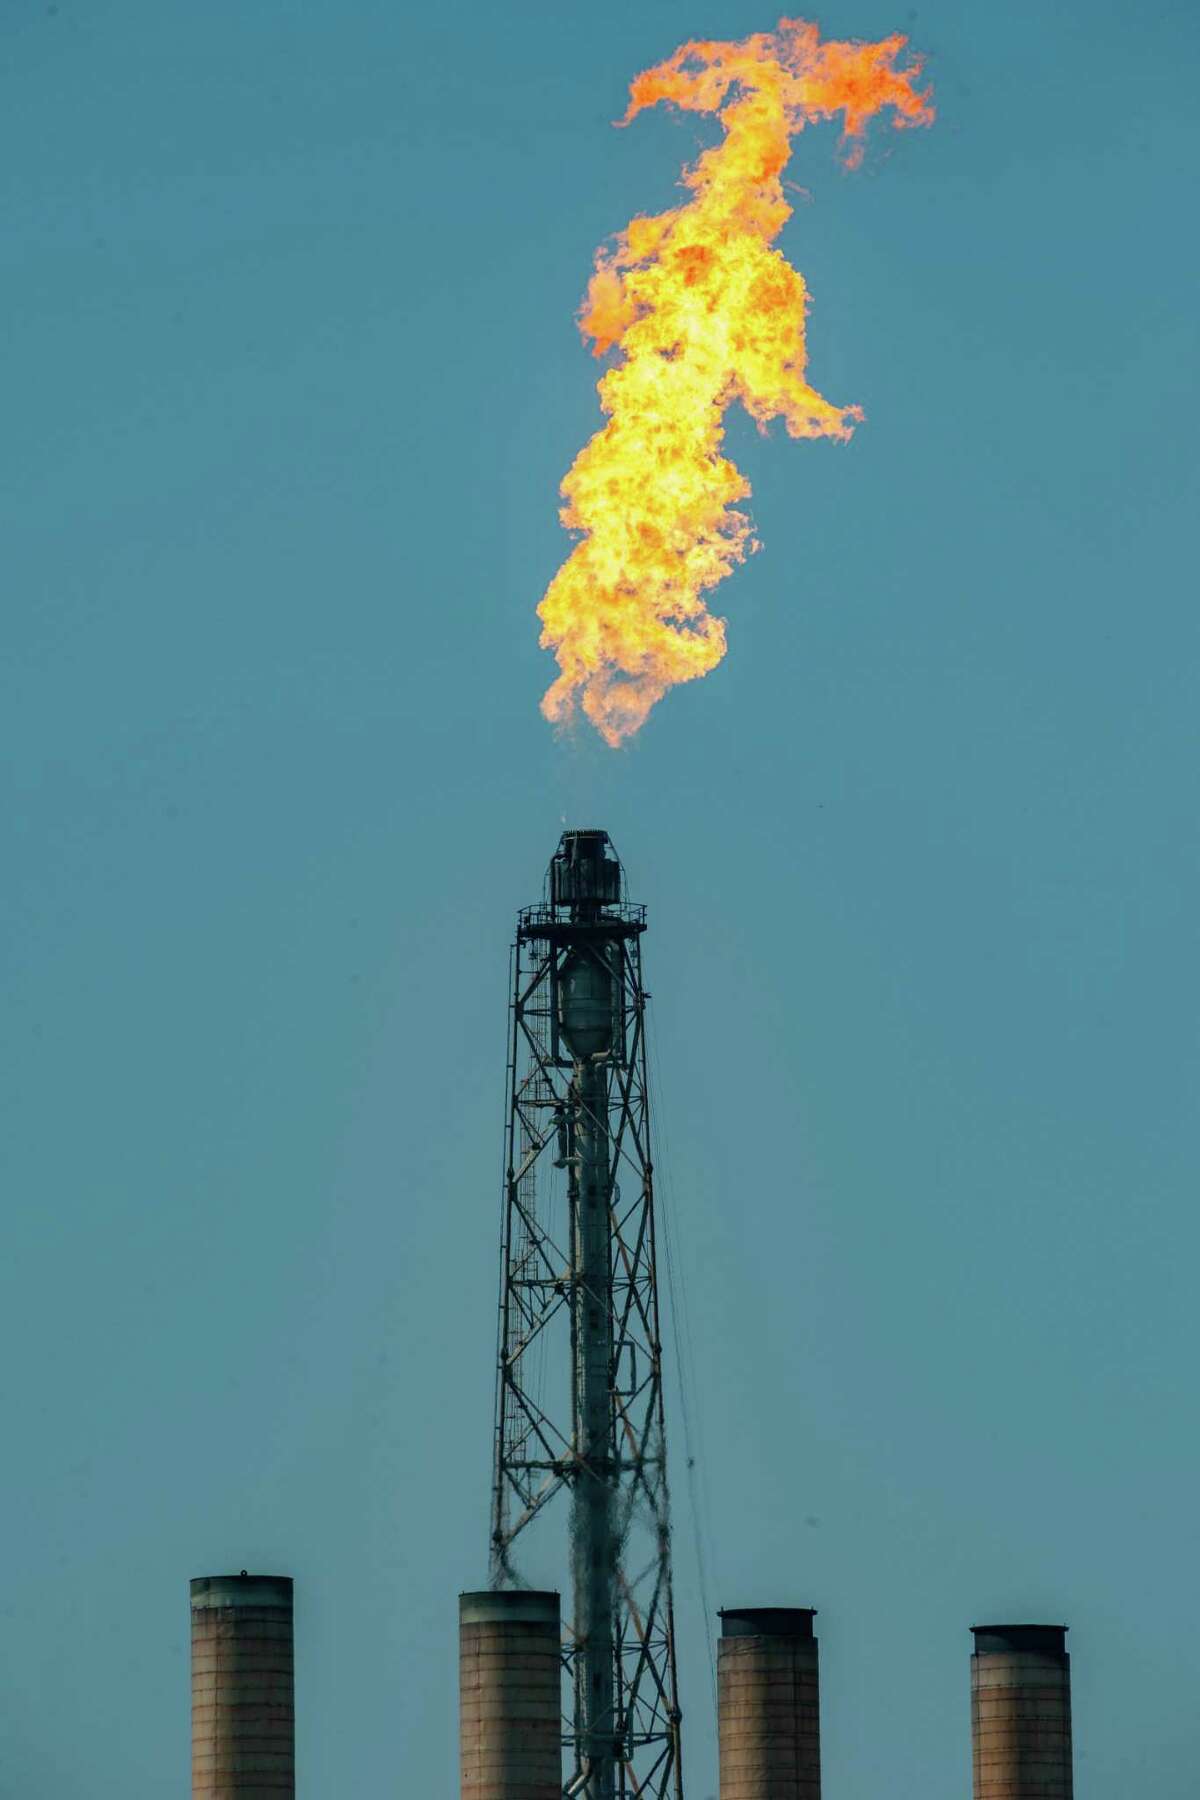 A flare burns off harmful gases when natural gas operations are disrupted.